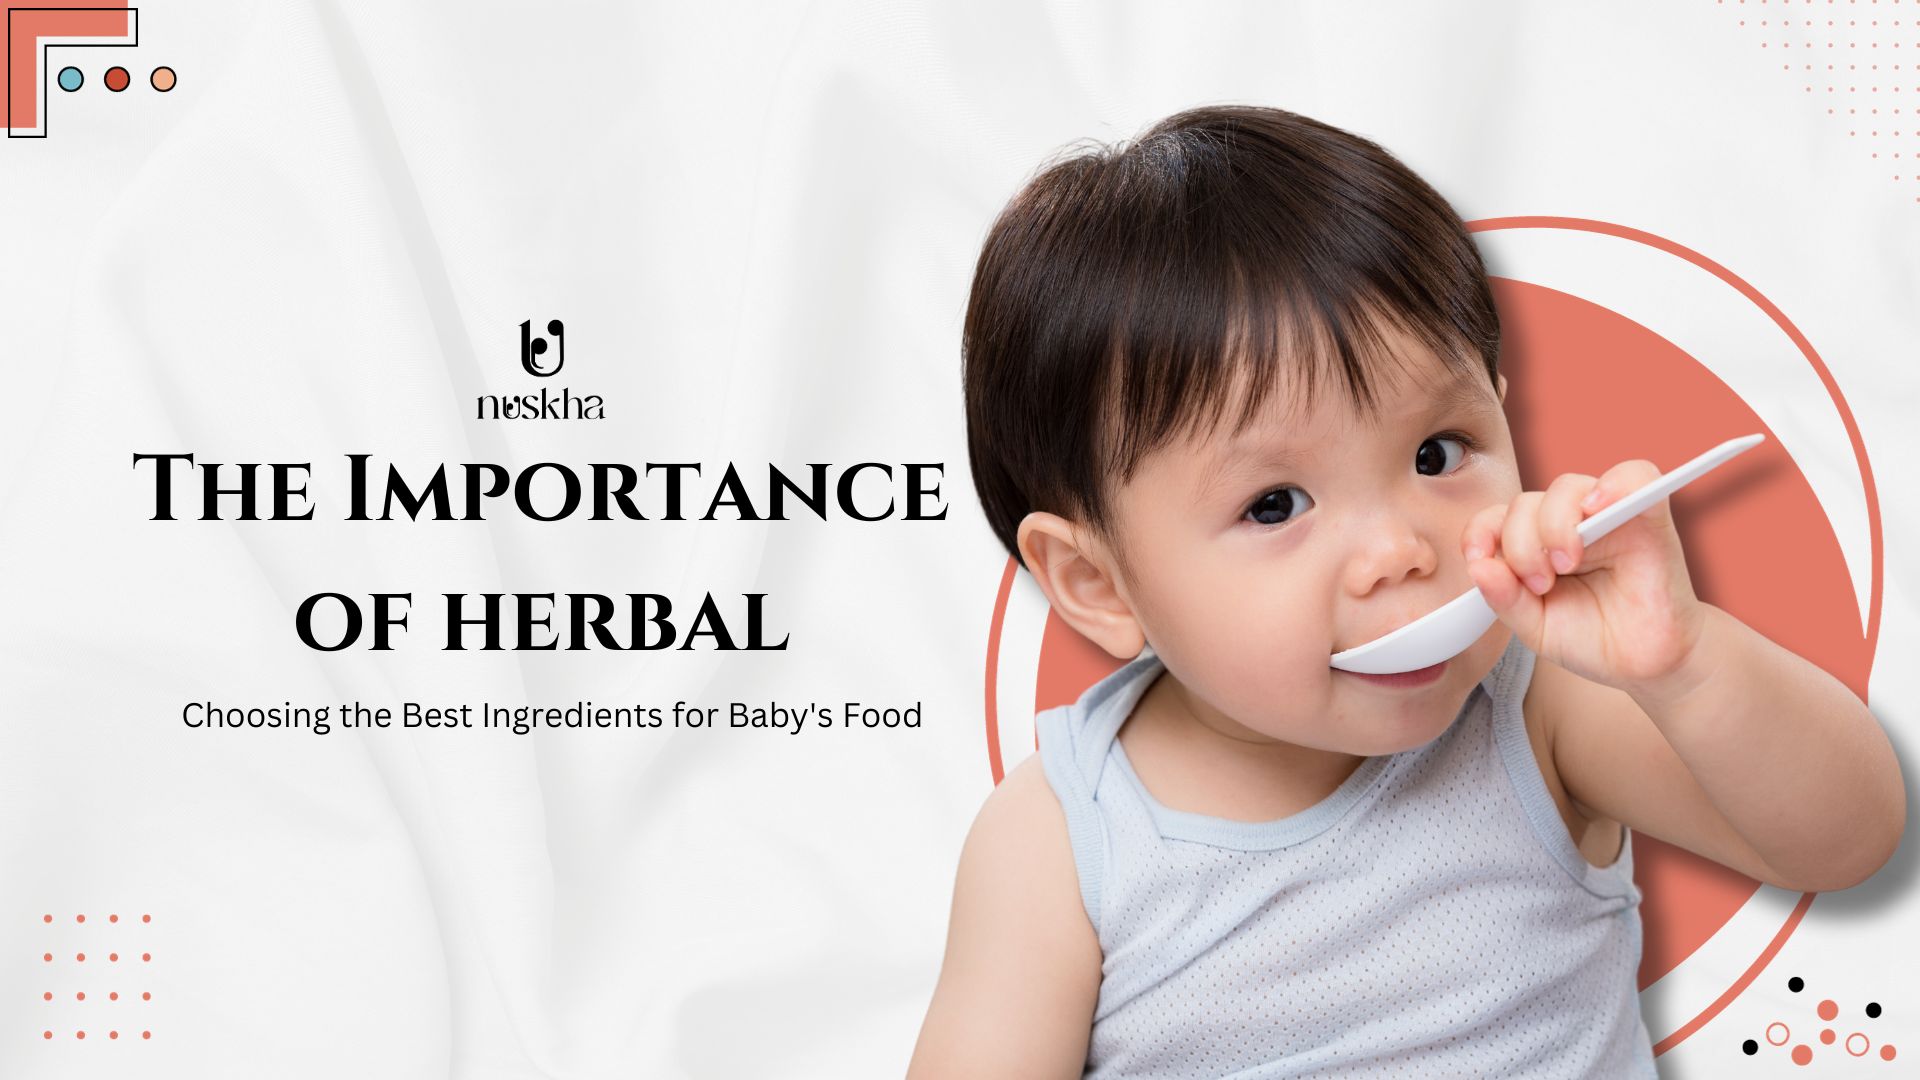 The Importance of Herbal: Choosing the Best Ingredients for Baby's Food